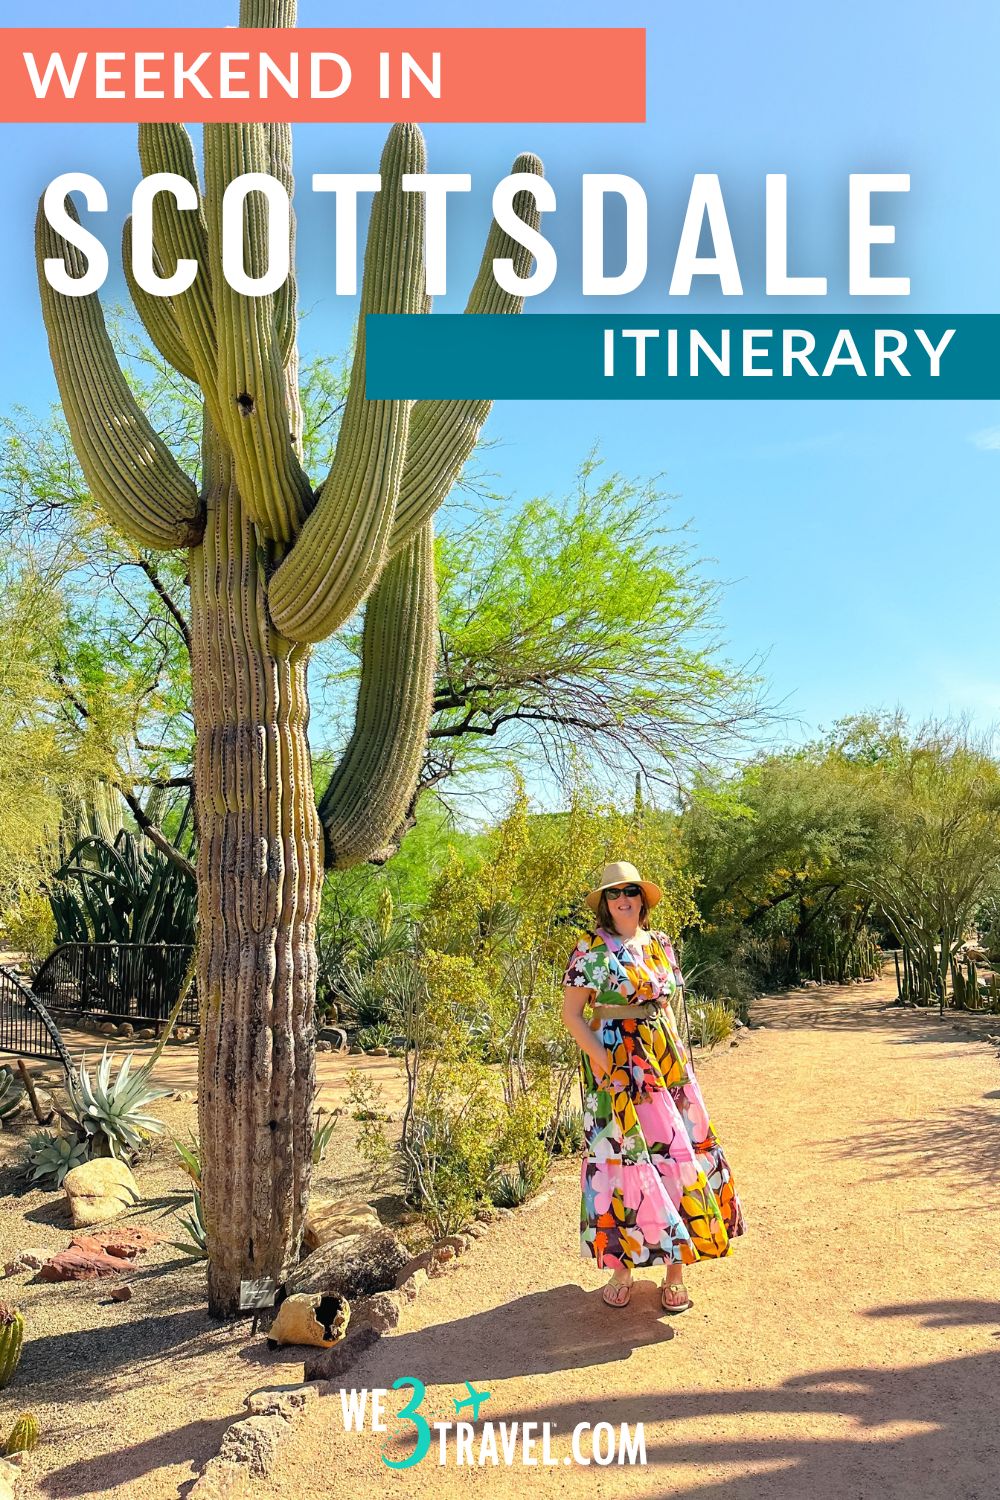 Scottsdale Arizona makes a great weekend getaway for families, couples/romantic getaways, or girl's trips/girlfriend getaways with amazing resort spas, golf courses, Scottsdale restaurants, Old Town Scottsdale and fun outdoor activities. Find out how to pack your 3 days in Scottsdale in this Scottsdale weekend itinerary!